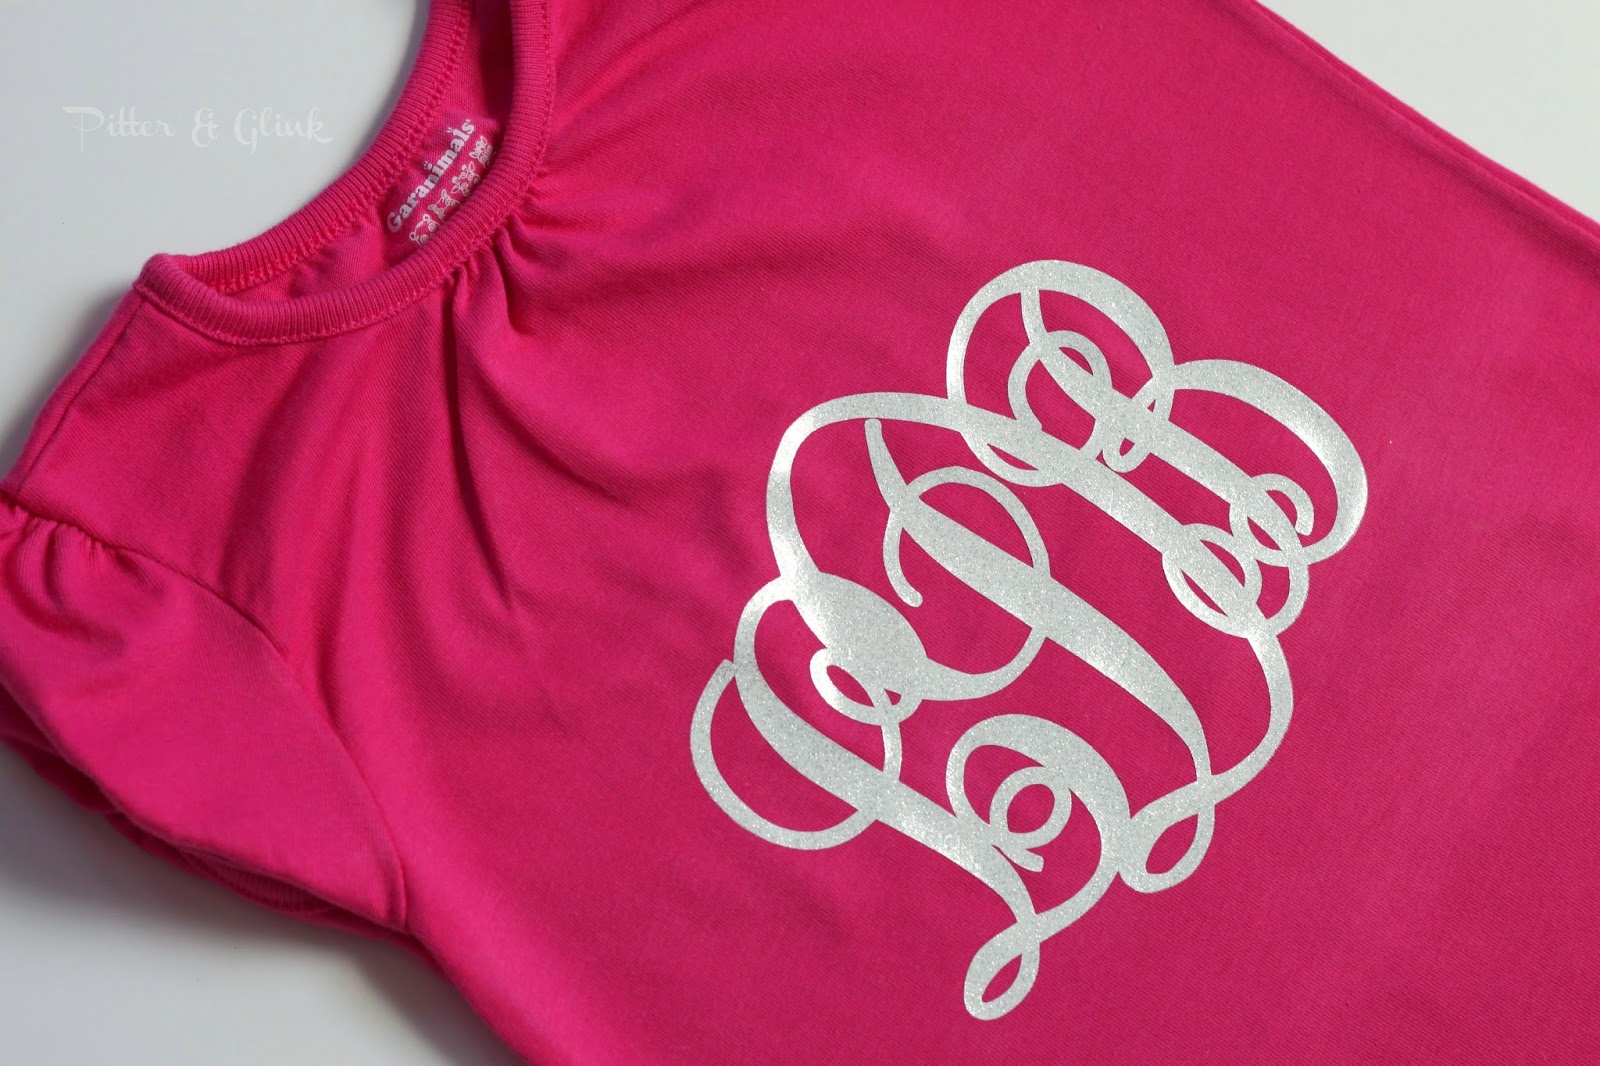 Create a Monogrammed T-shirt with Silhouette Heat Transfer Material: A Tutorial from Pitter and Glink